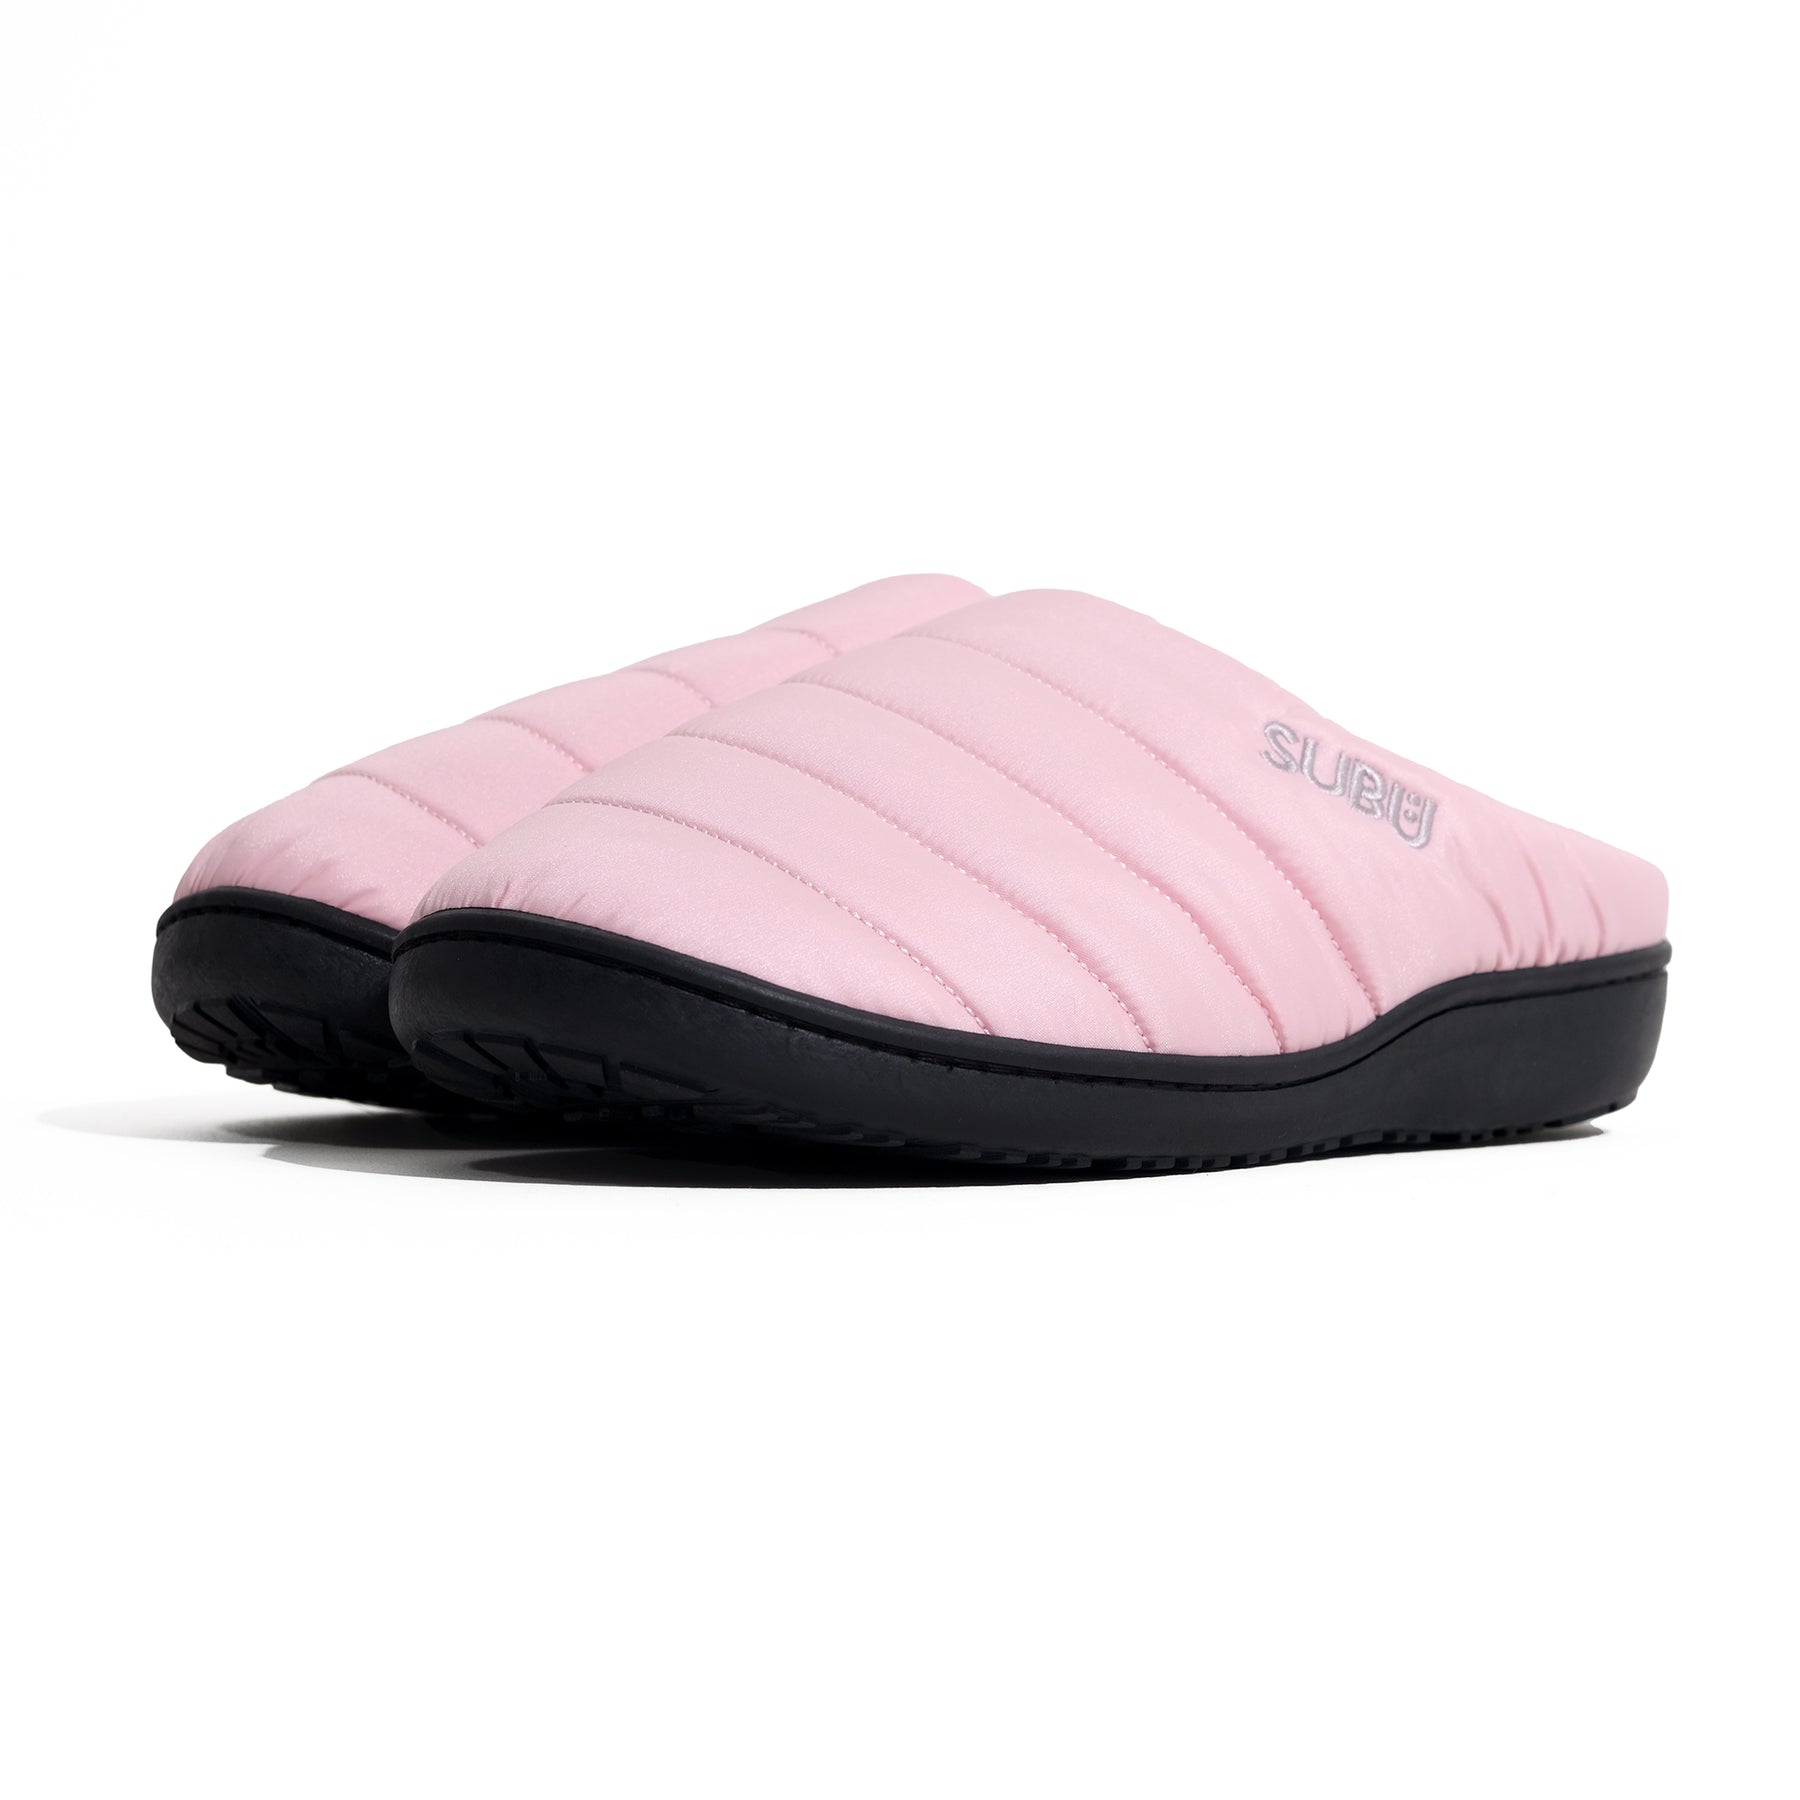 AMEICO - Official US Fall - Winter SUBU of & - Pink Slippers Distributor